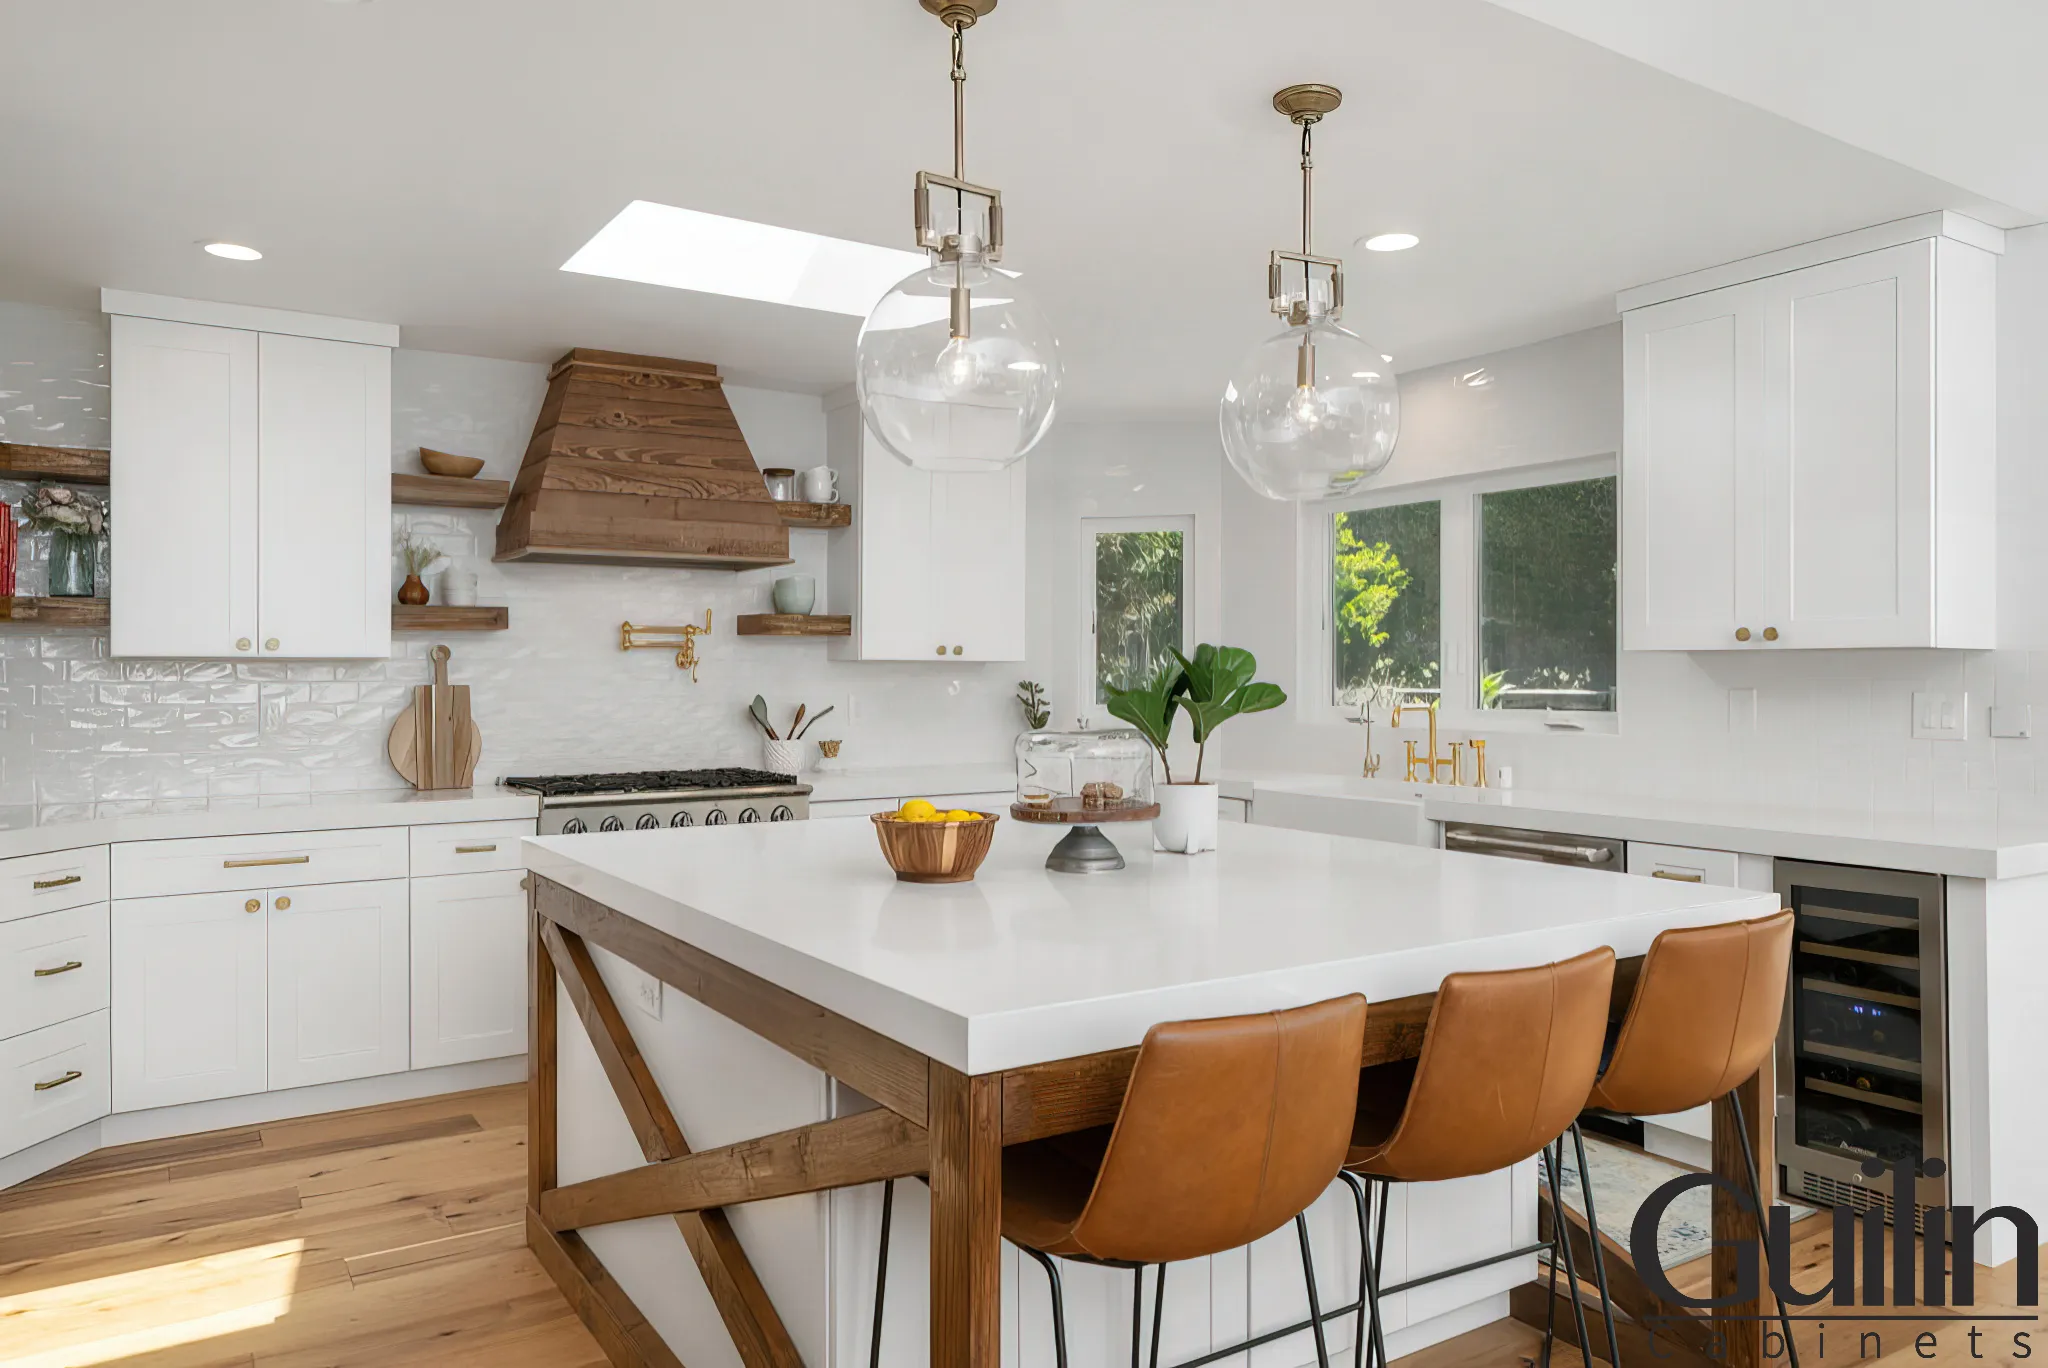 Good lighting can dramatically transform the look and feel of a kitchen. 